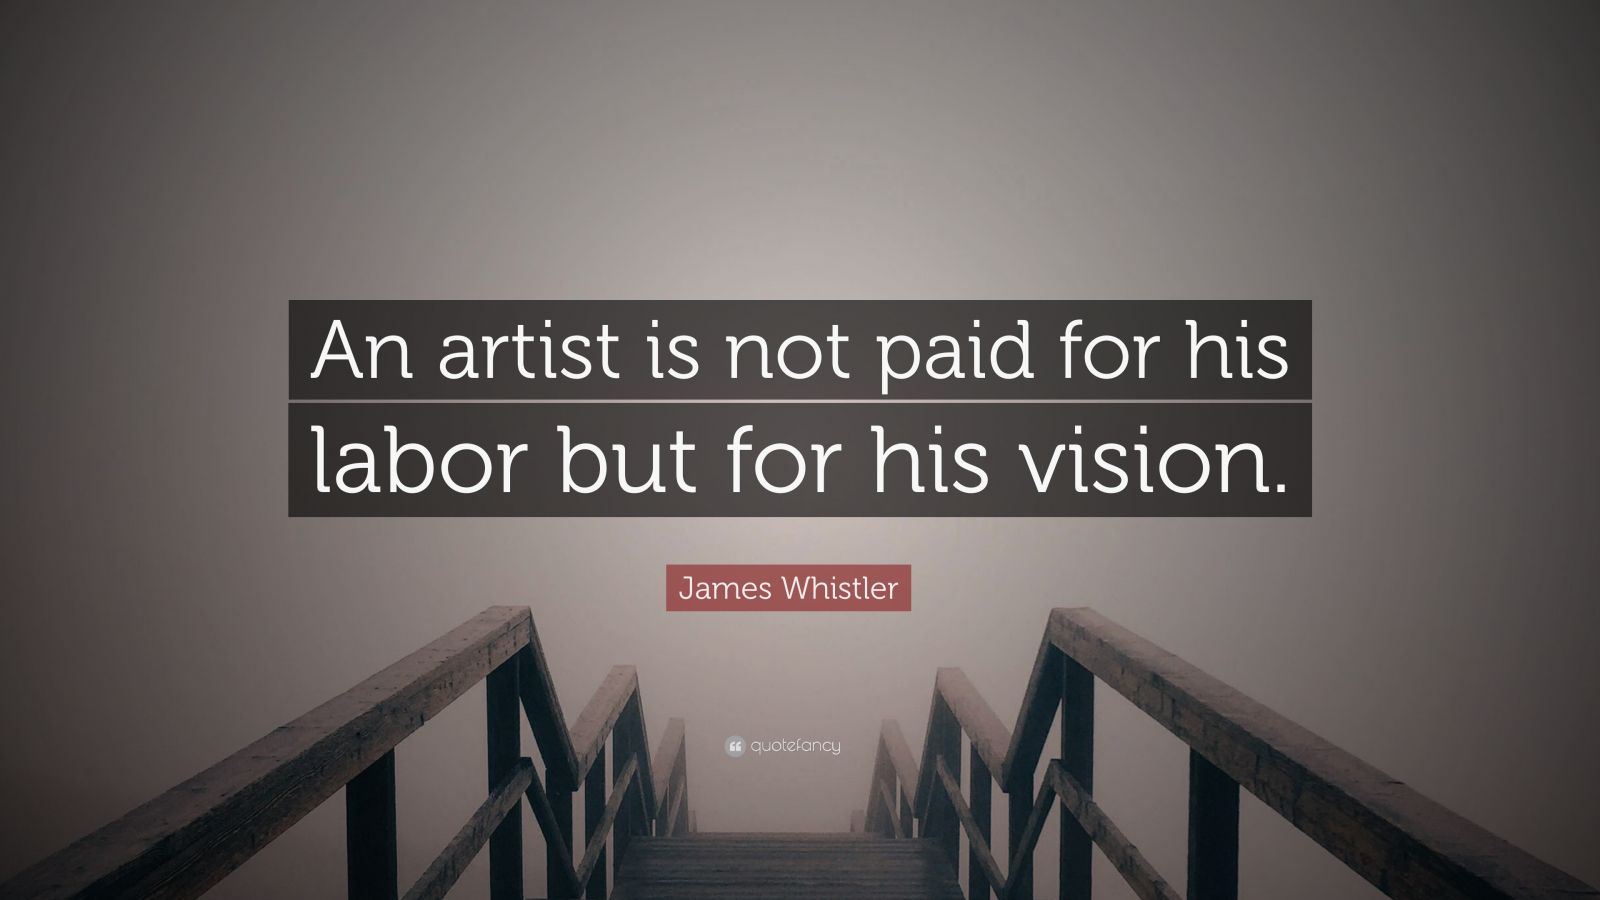 James Whistler Quote: “An artist is not paid for his labor but for his ...